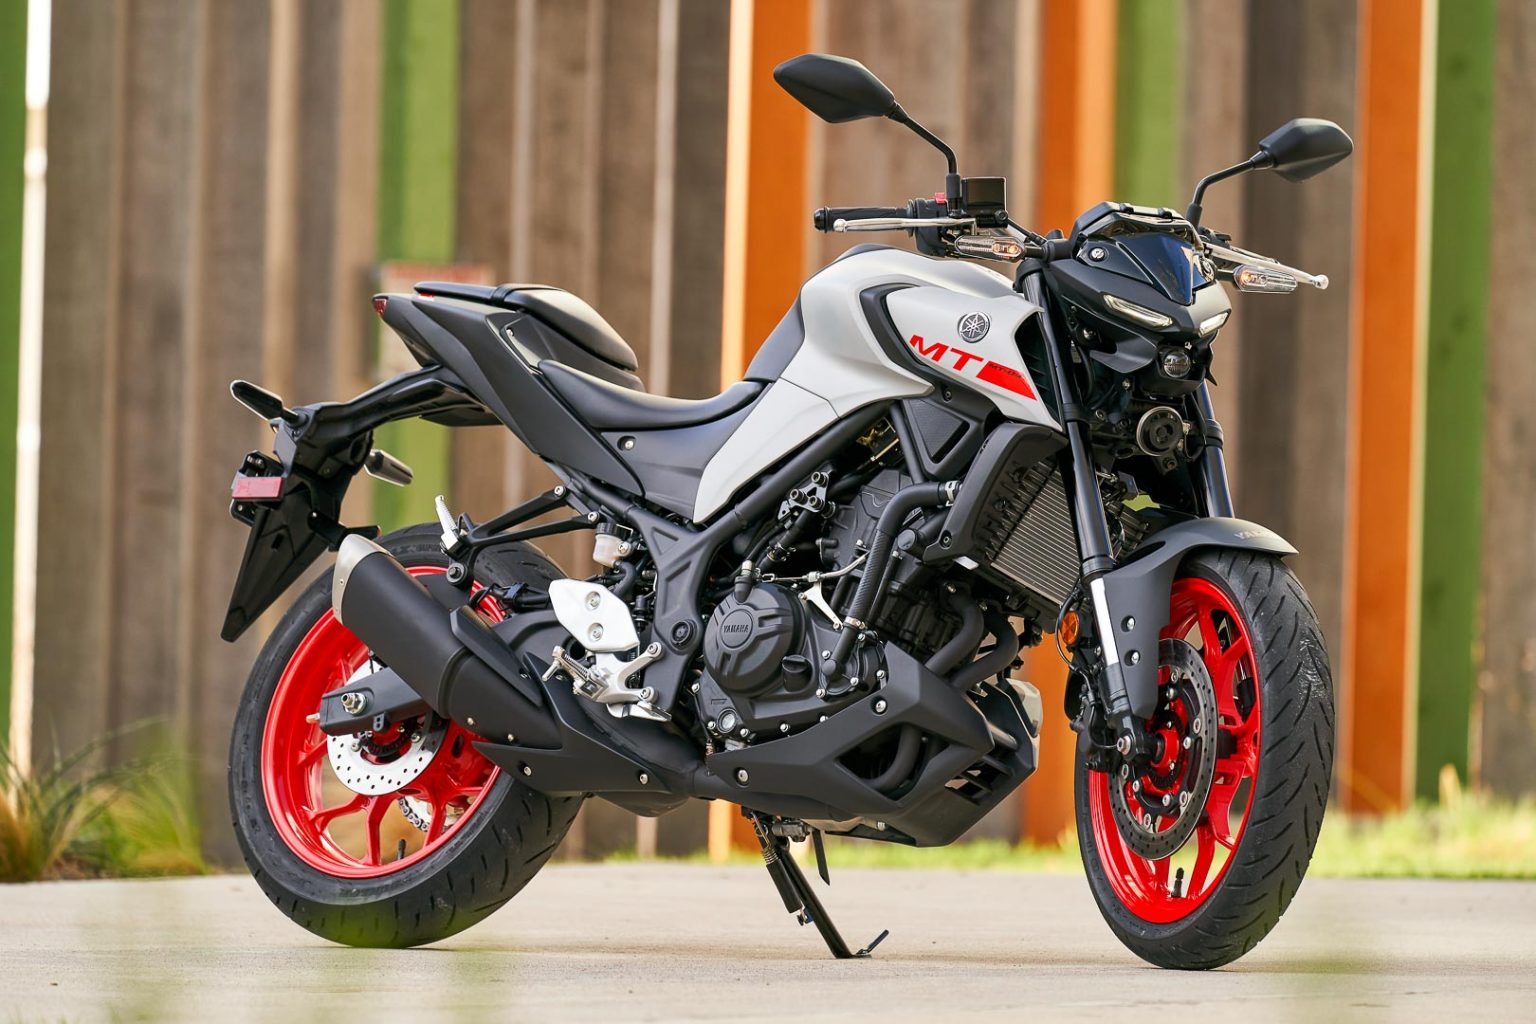 2020 YAMAHA MT03 REVIEW (13 FAST FACTS)